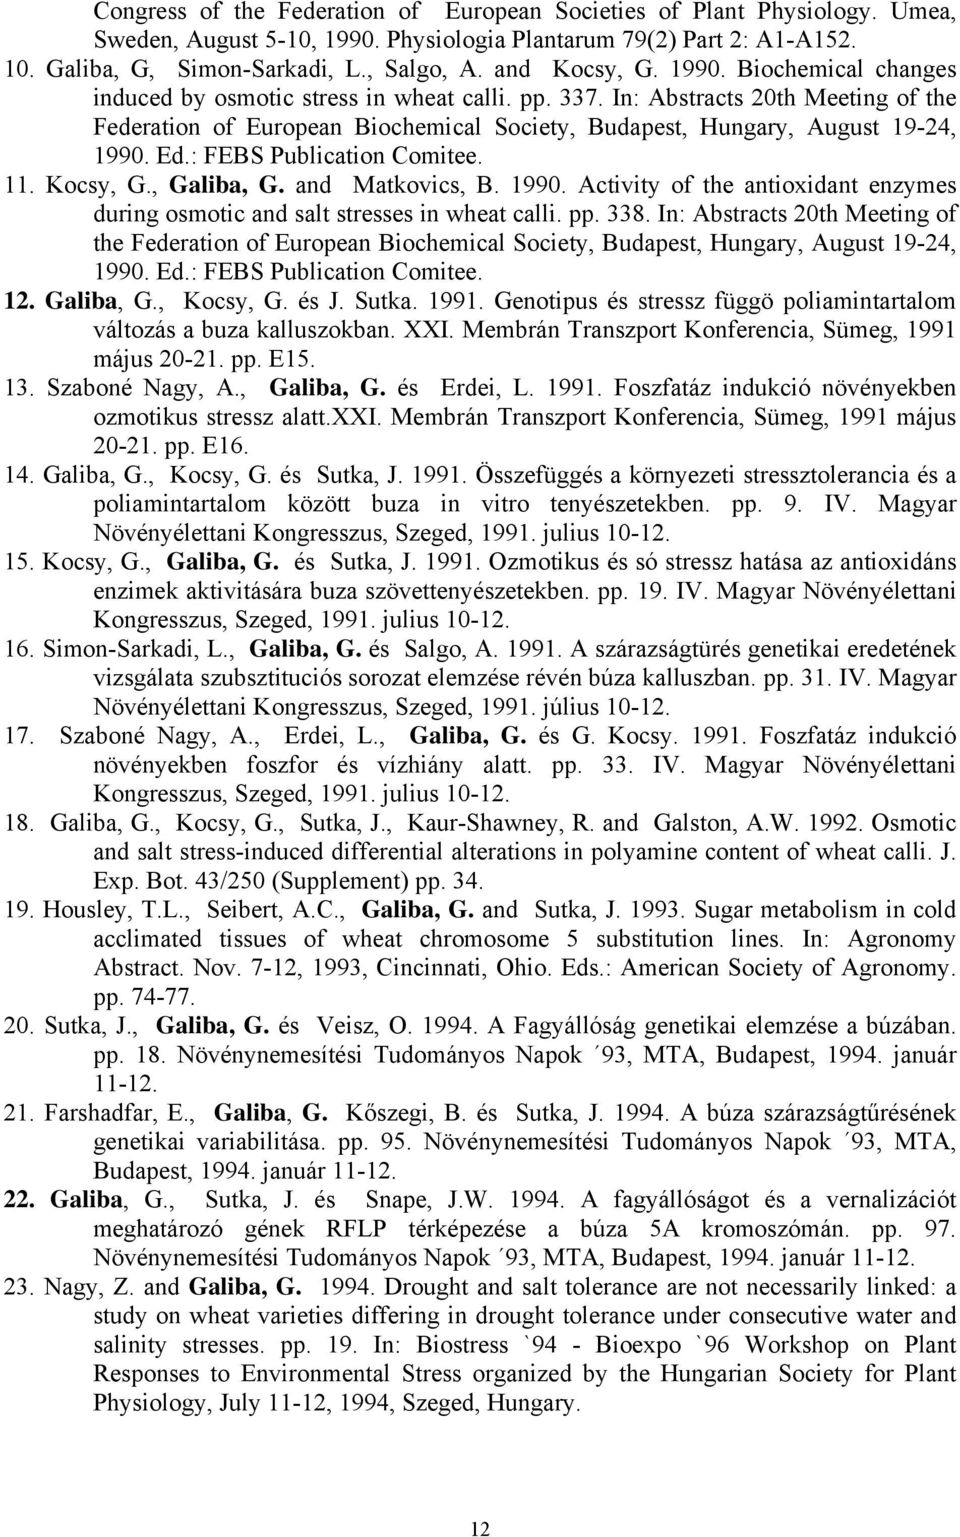 In: Abstracts 20th Meeting of the Federation of European Biochemical Society, Budapest, Hungary, August 19-24, 1990.